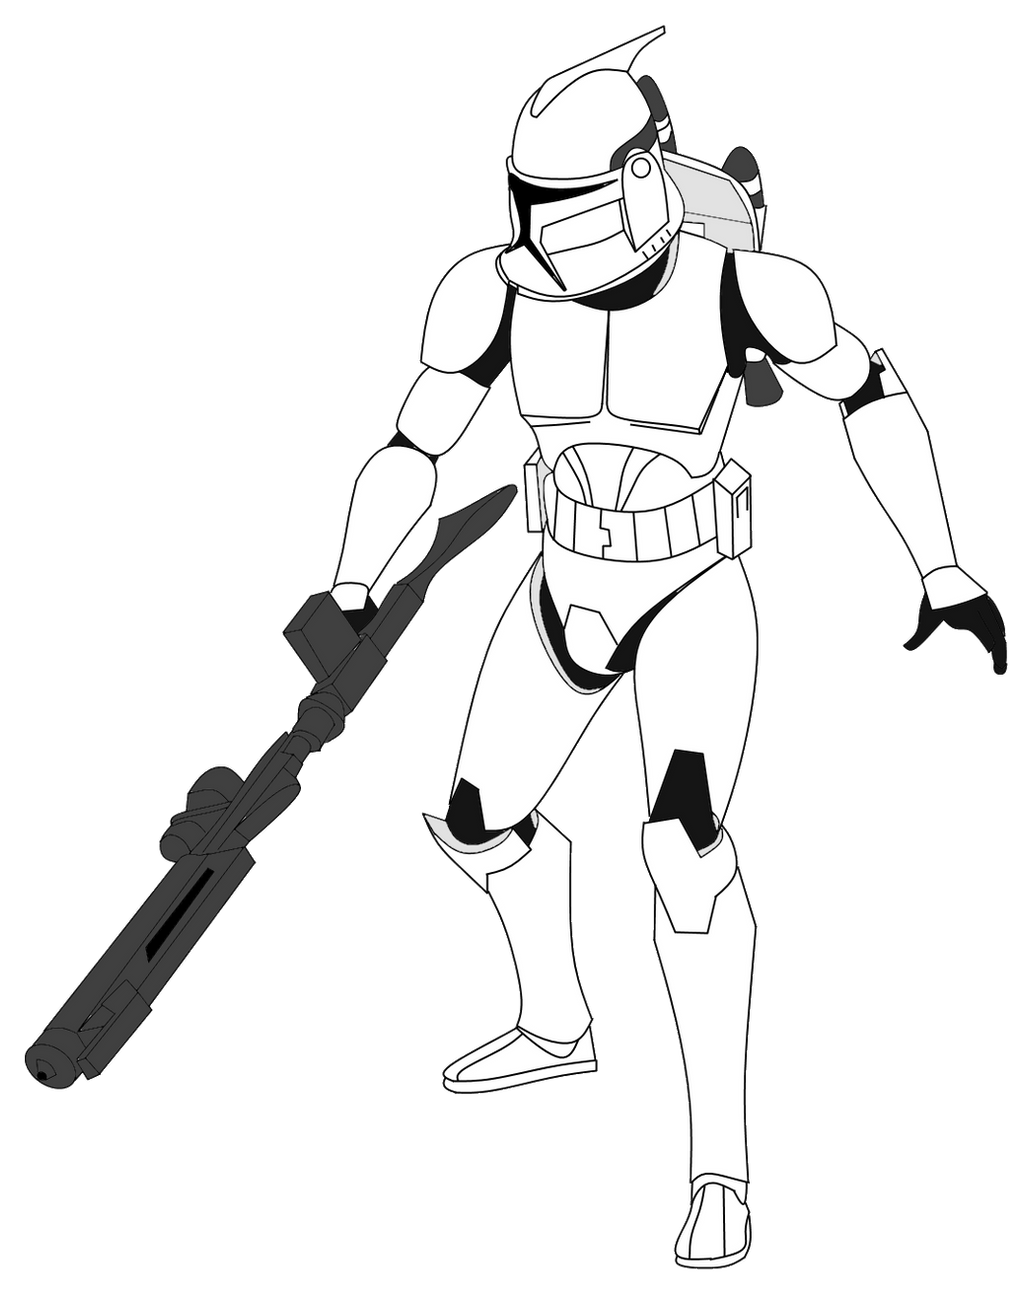 Clone jet trooper v by fbombheart on